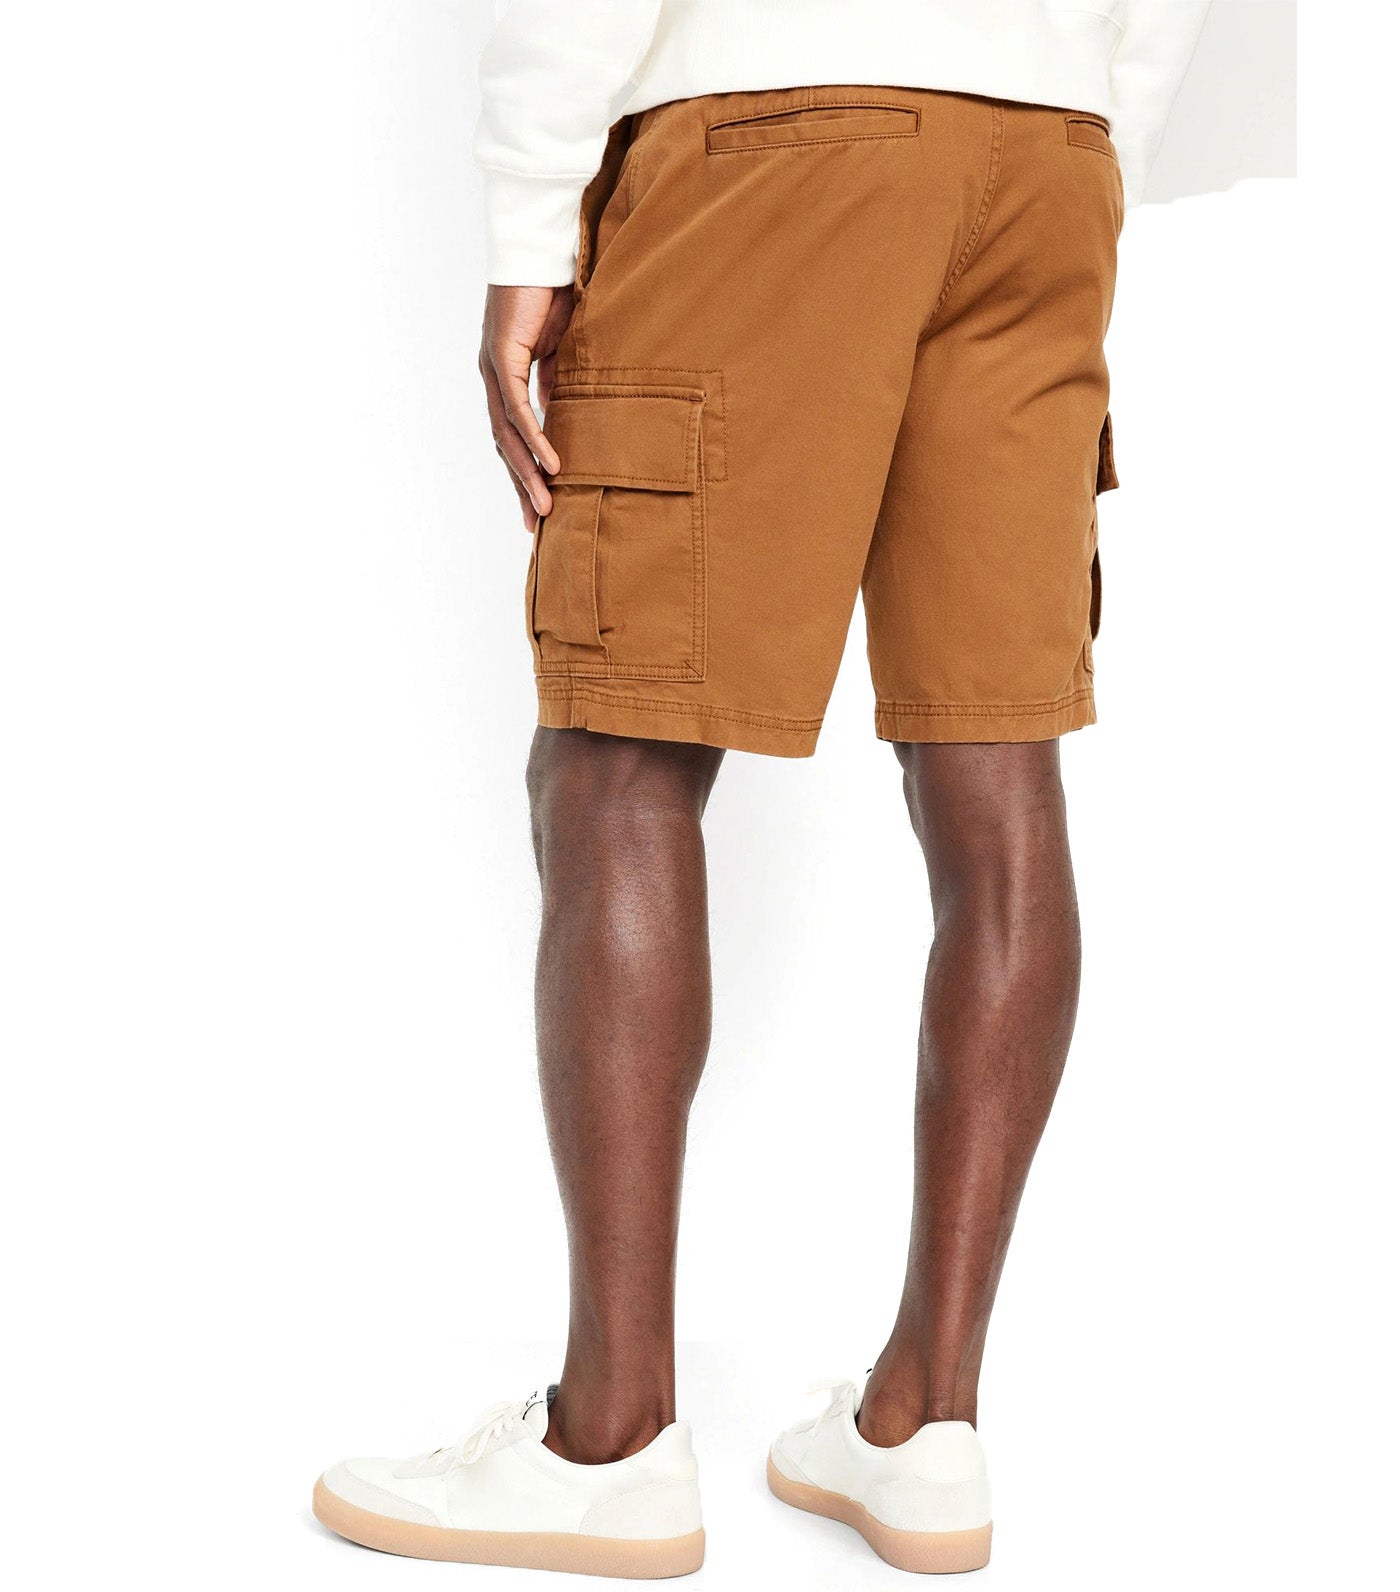 Lived-In Cargo Shorts For Men - 10-Inch Inseam Falconry